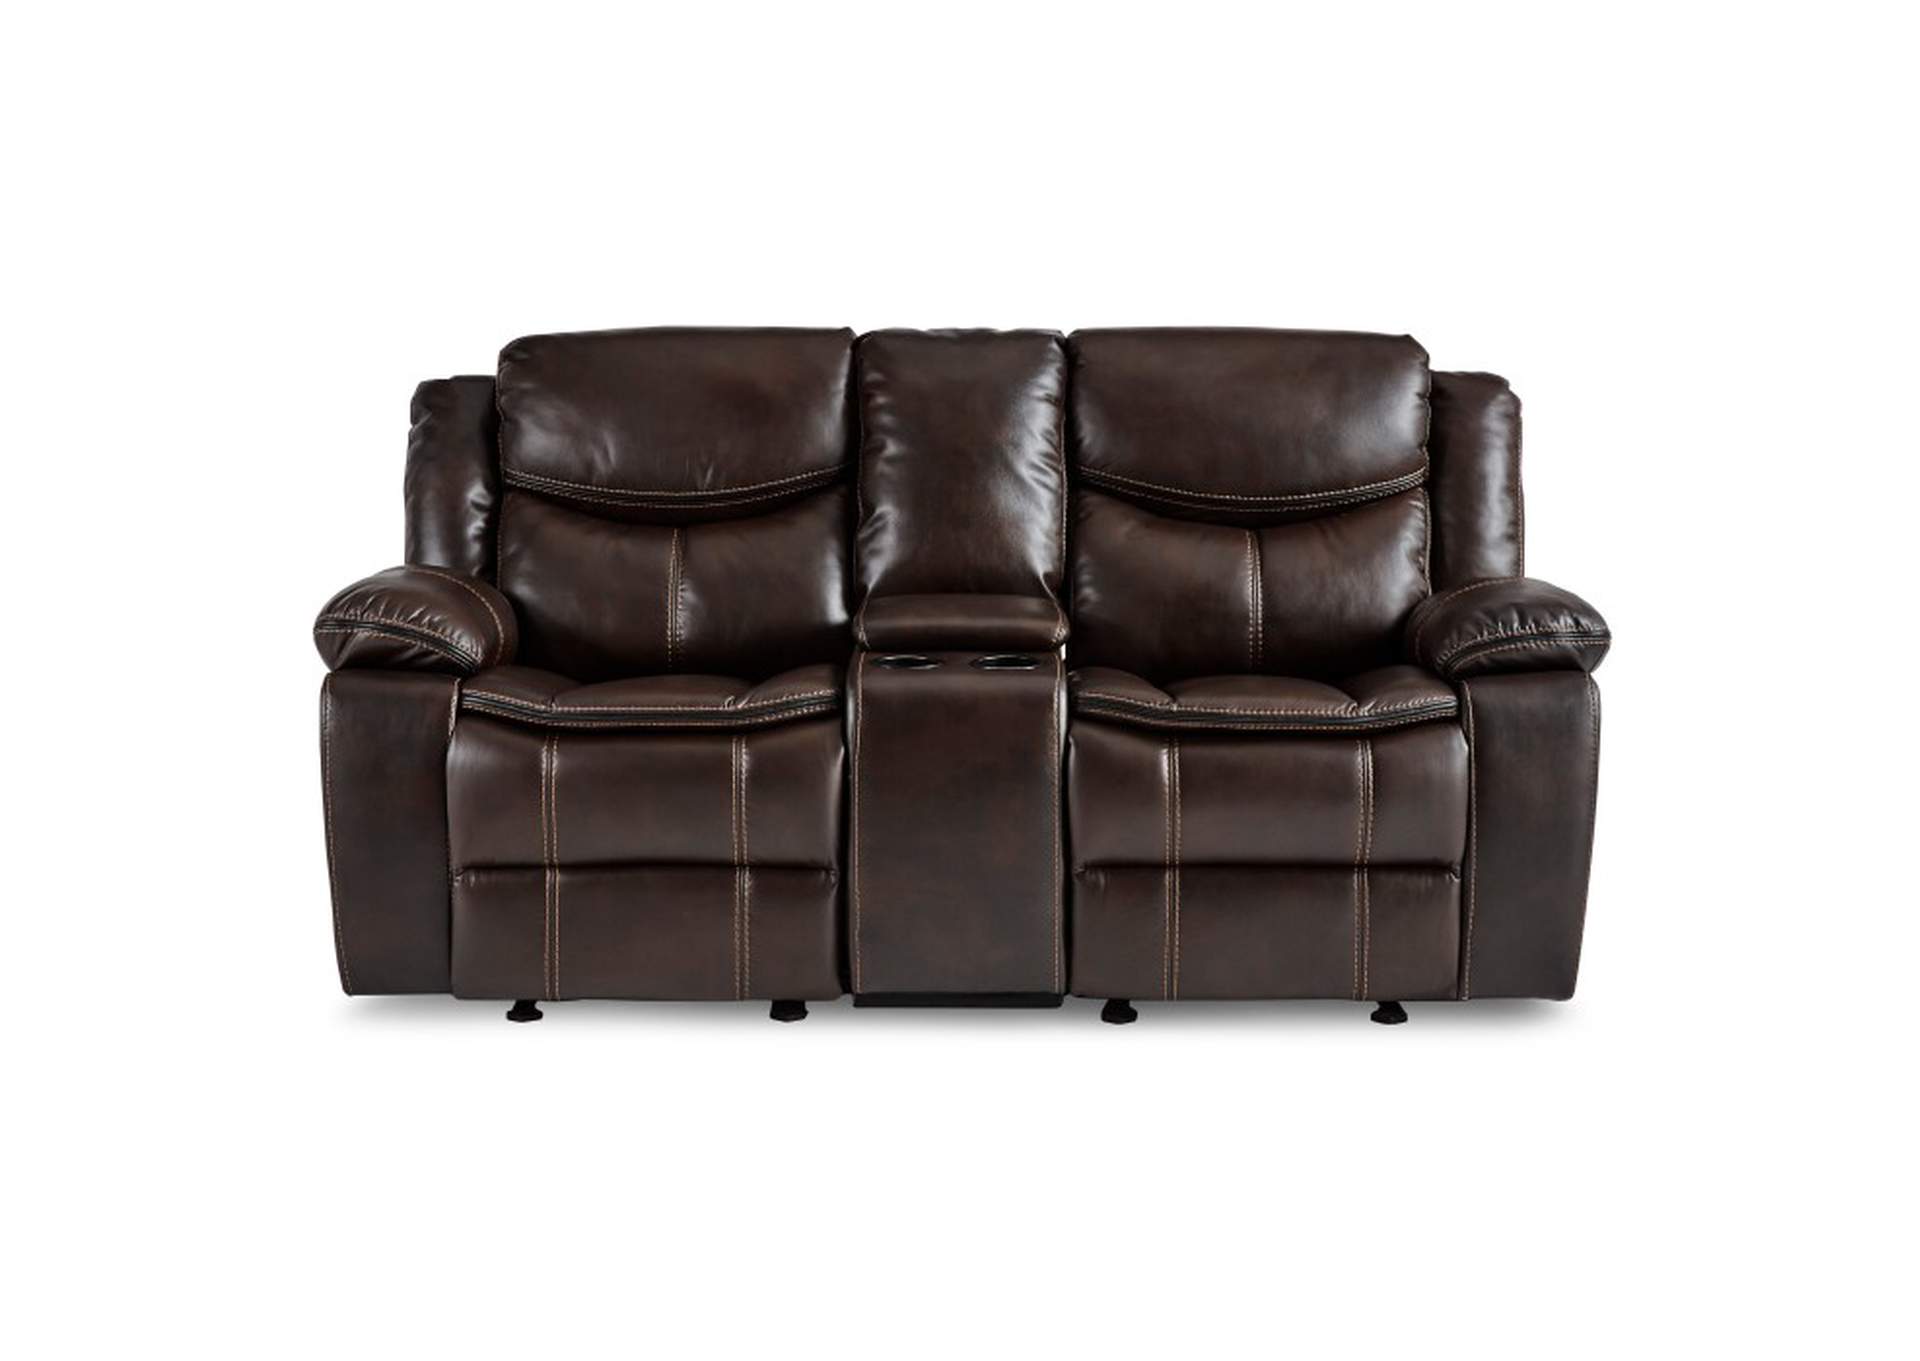 Bastrop Double Glider Reclining Love Seat with Center Console,Homelegance